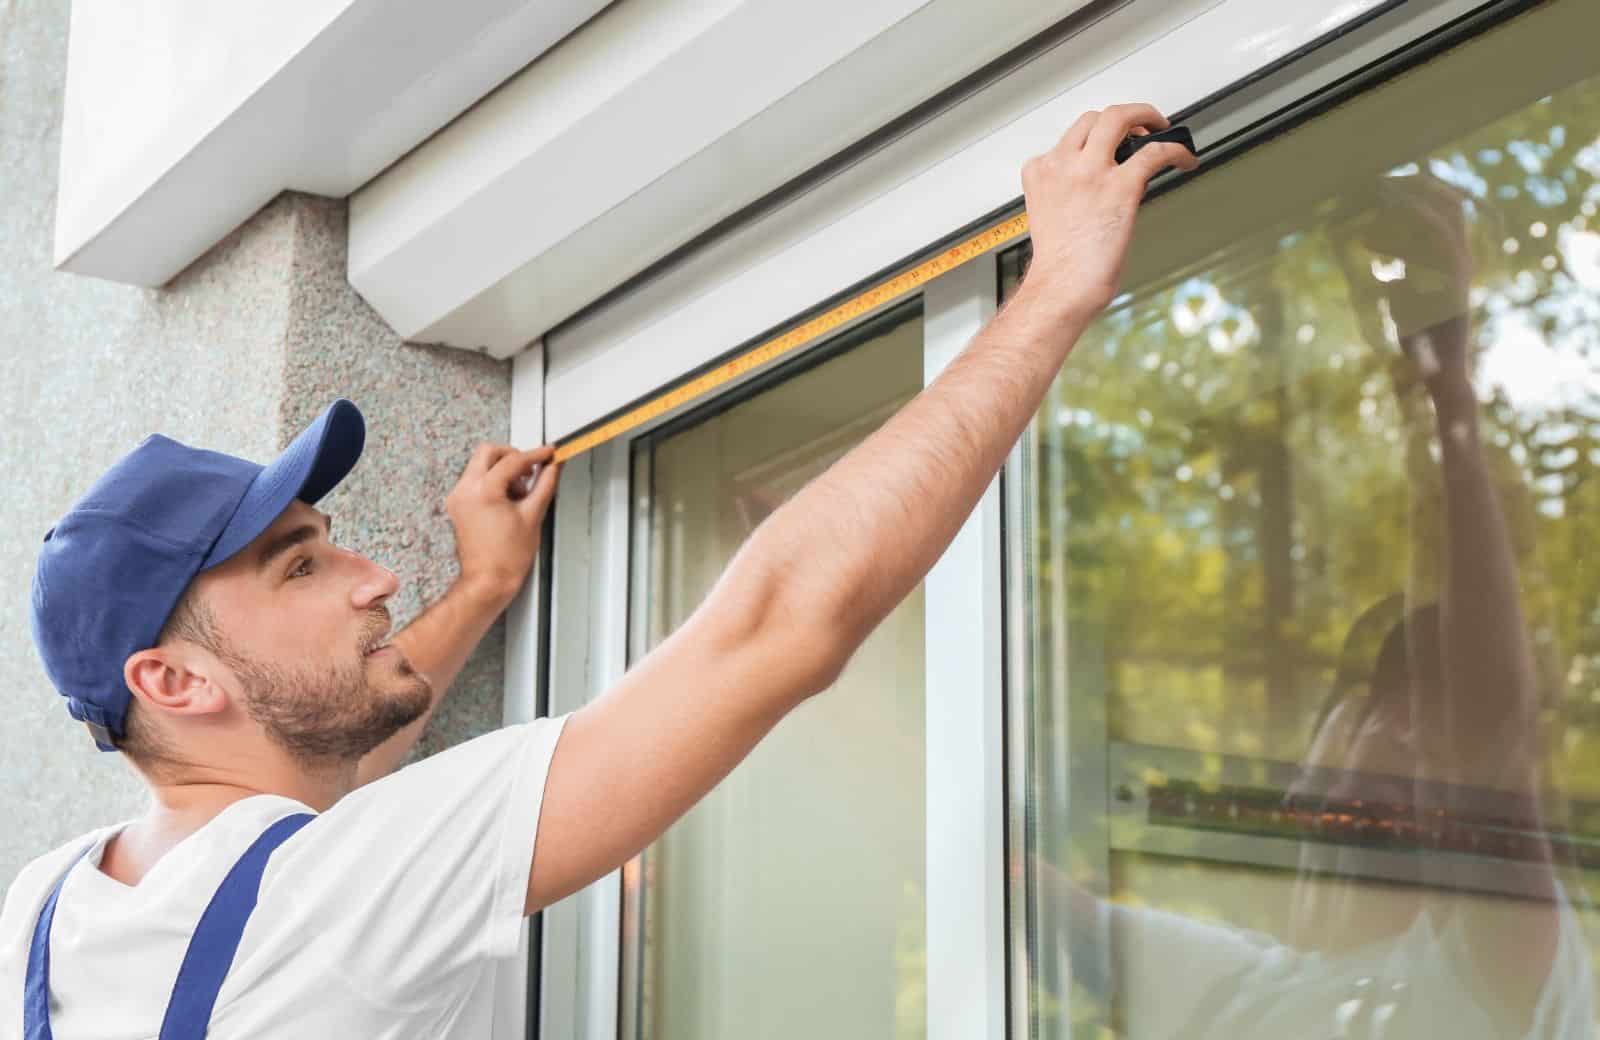 How to Measure a Window for Glass Replacement